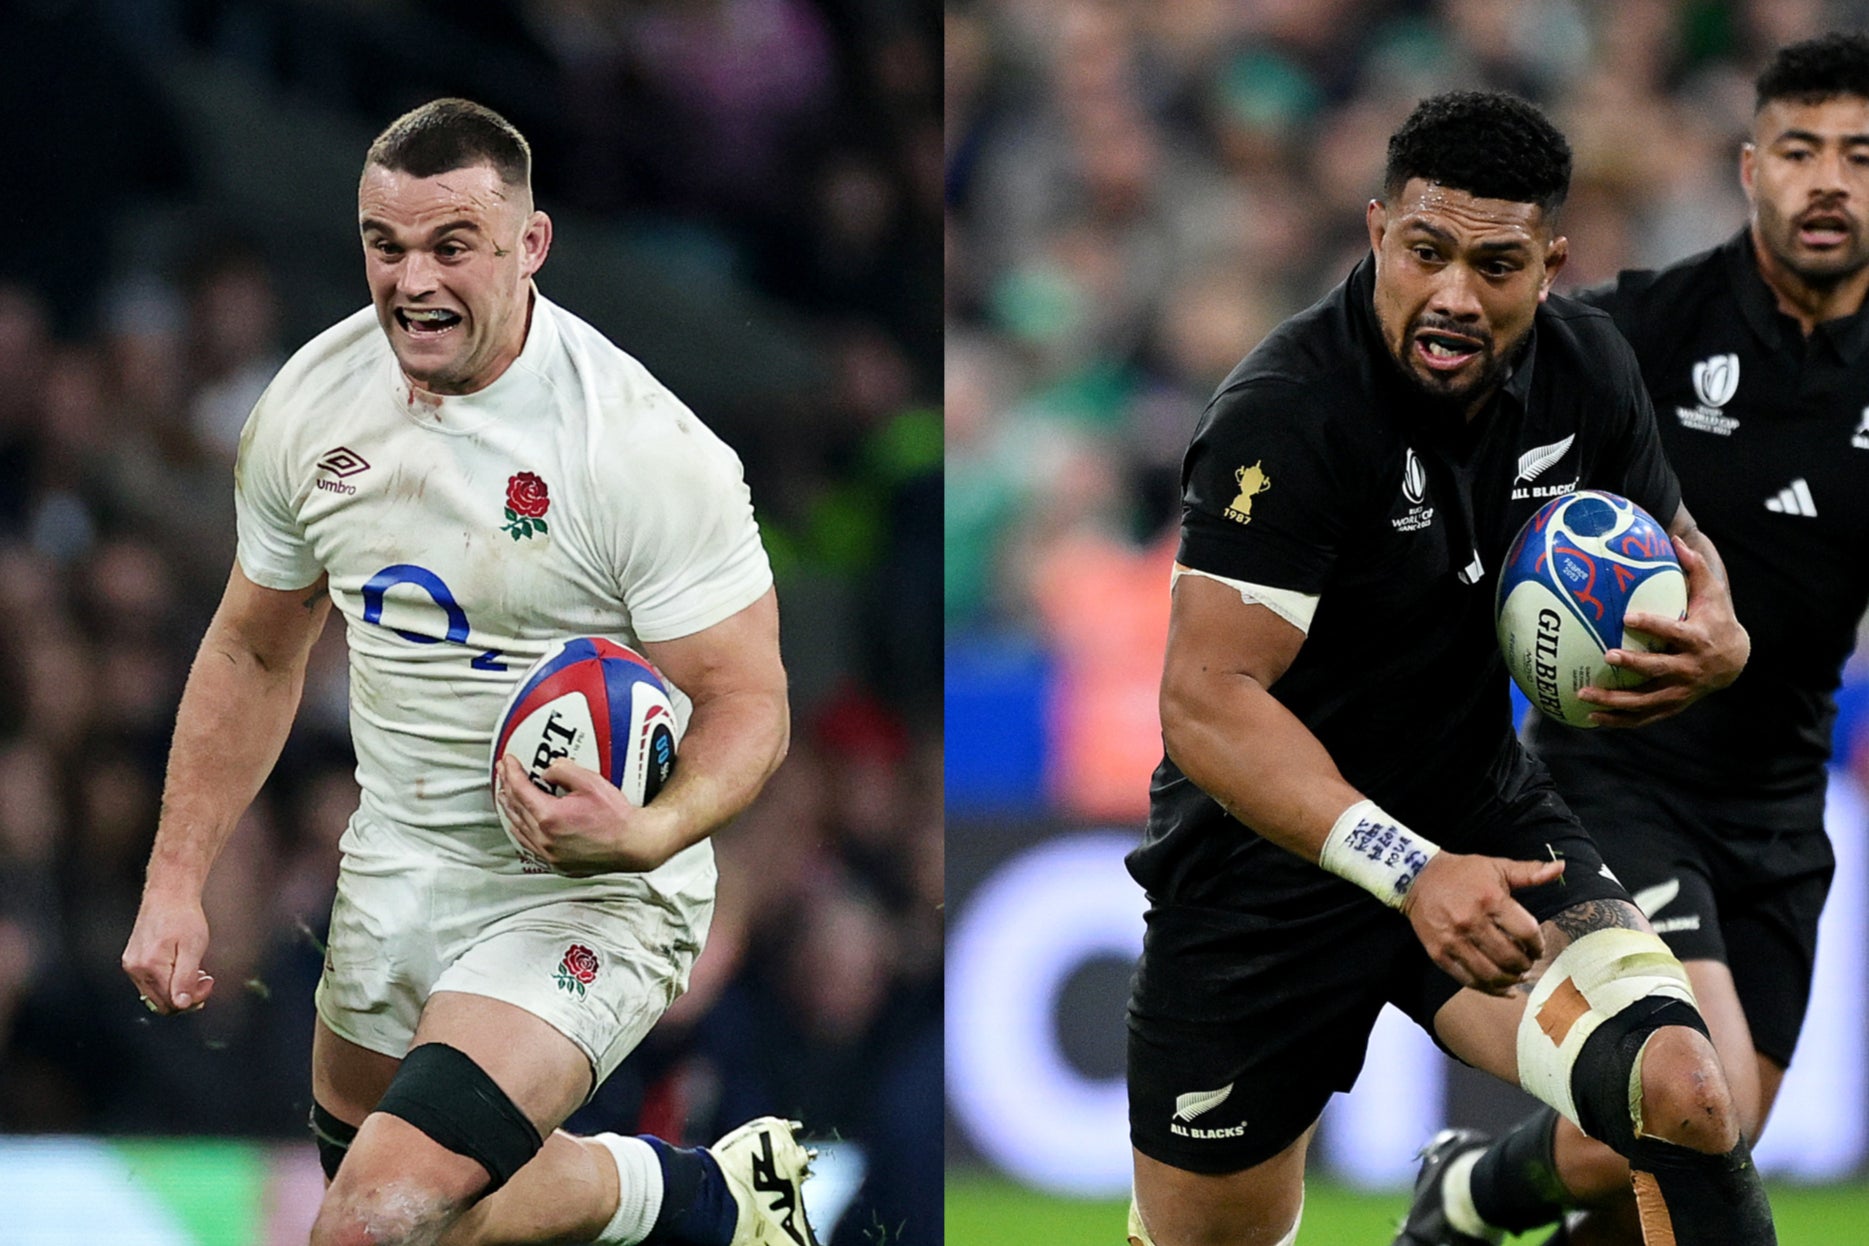 The battle between Ben Earl and Ardie Savea will be key to England’s series in New Zealand